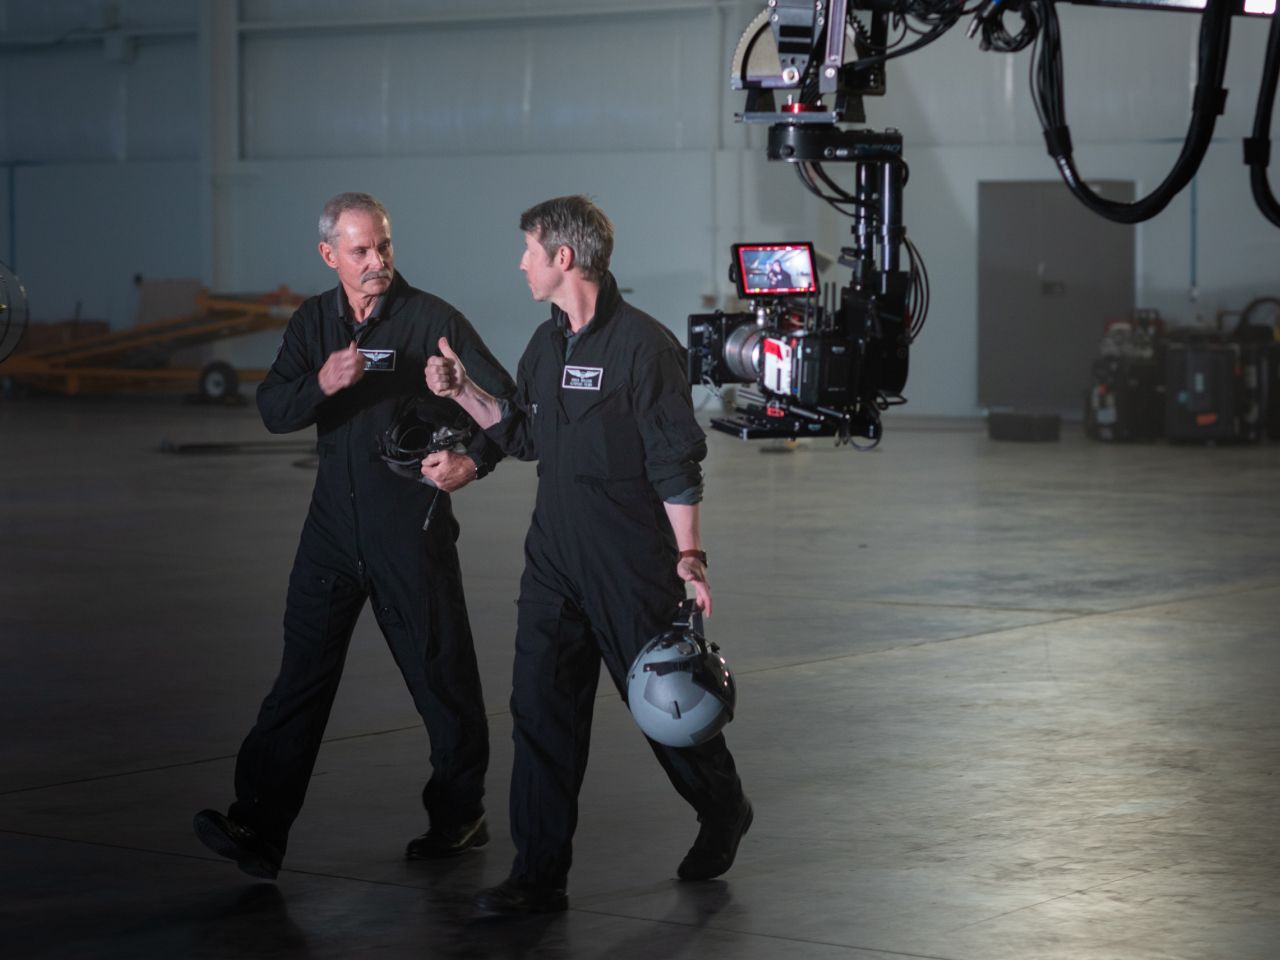 Two men walking through a jet hangar, carrying helmets. There is a movie camera following them on a jib.